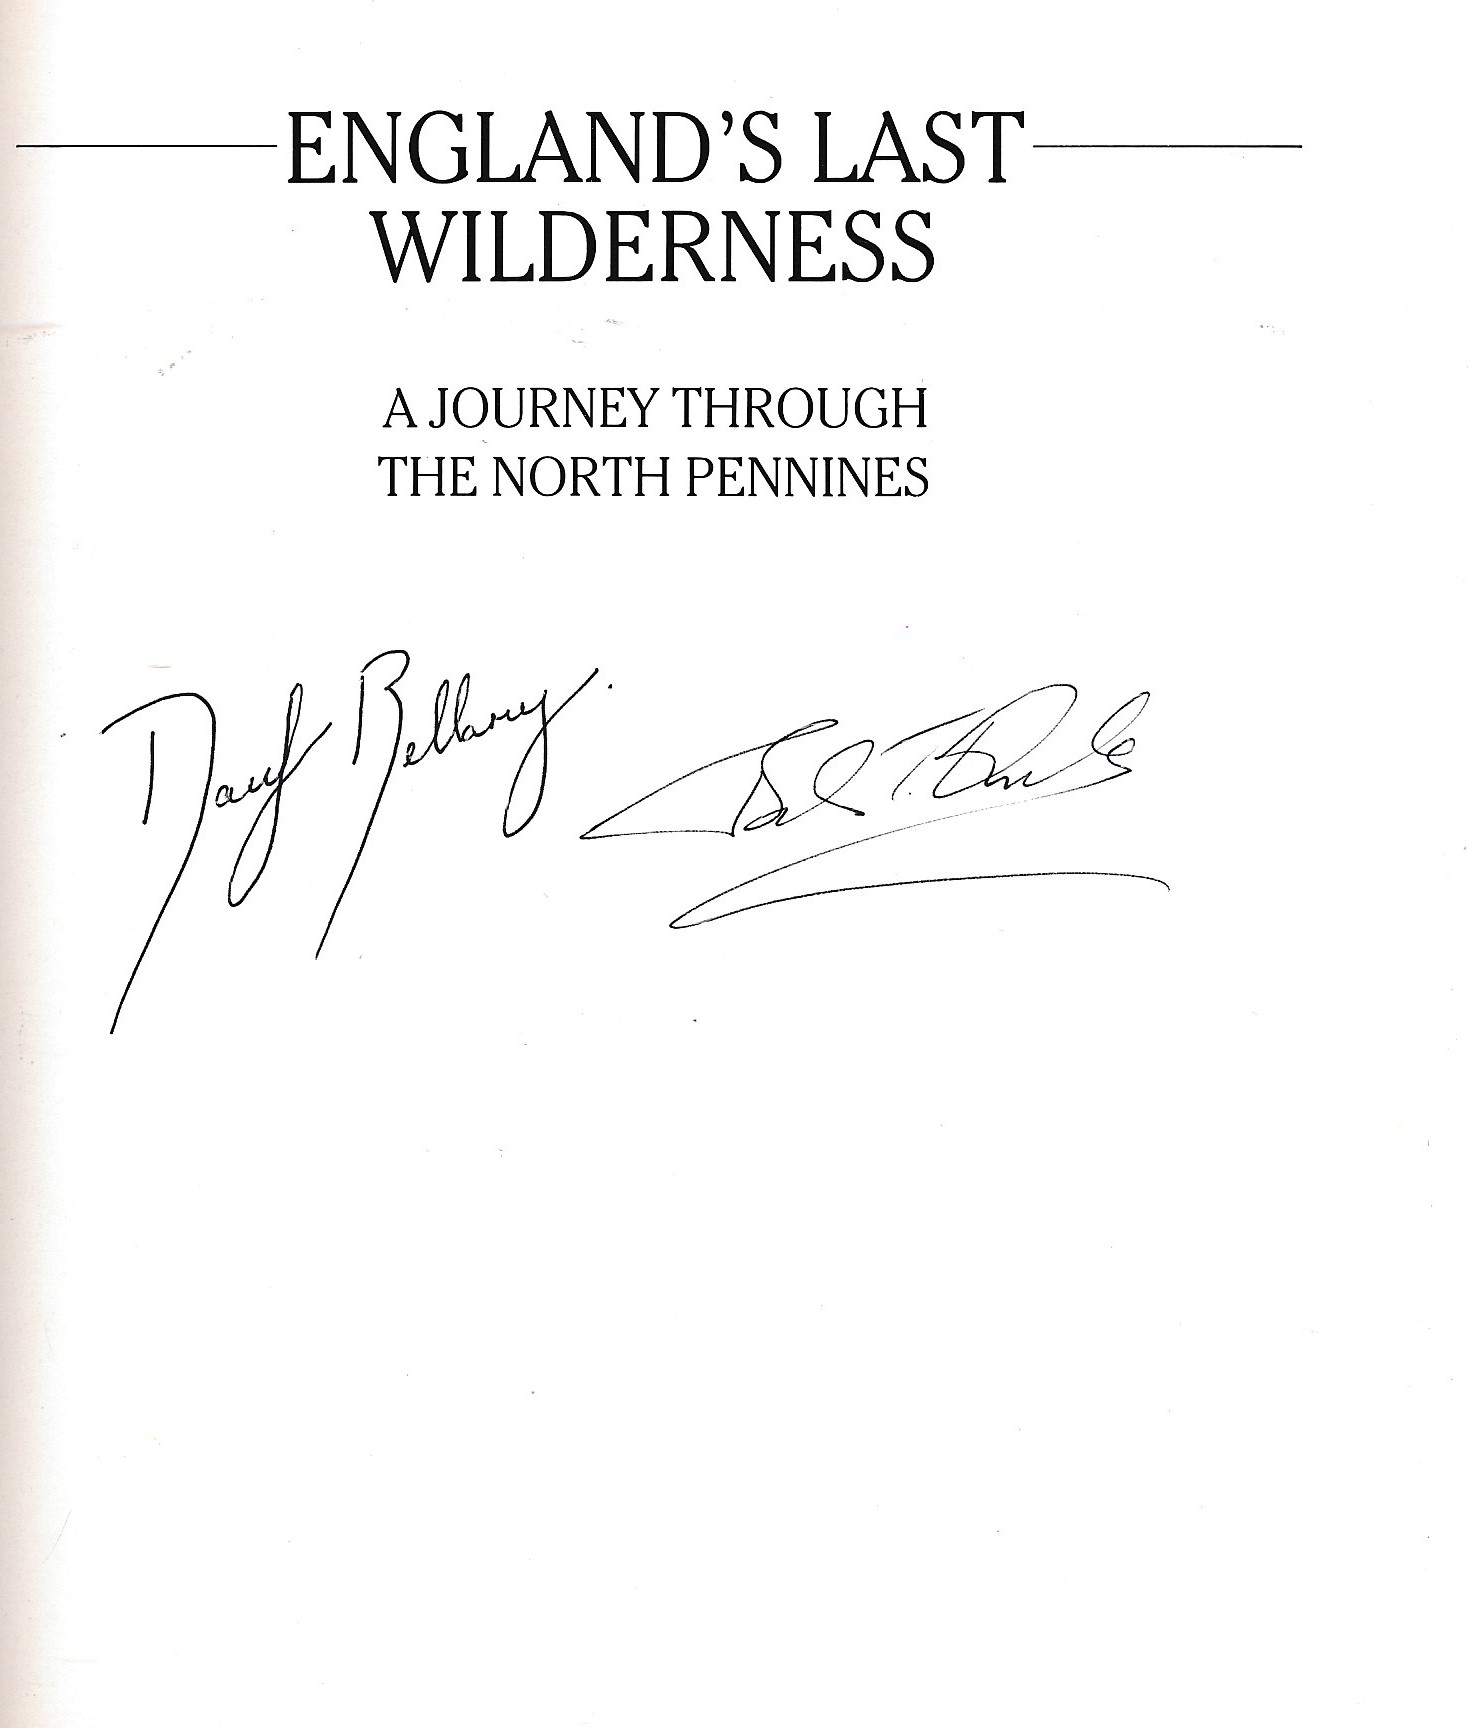 England's Last Wilderness. A Journey Through the North Pennines. Signed copy.